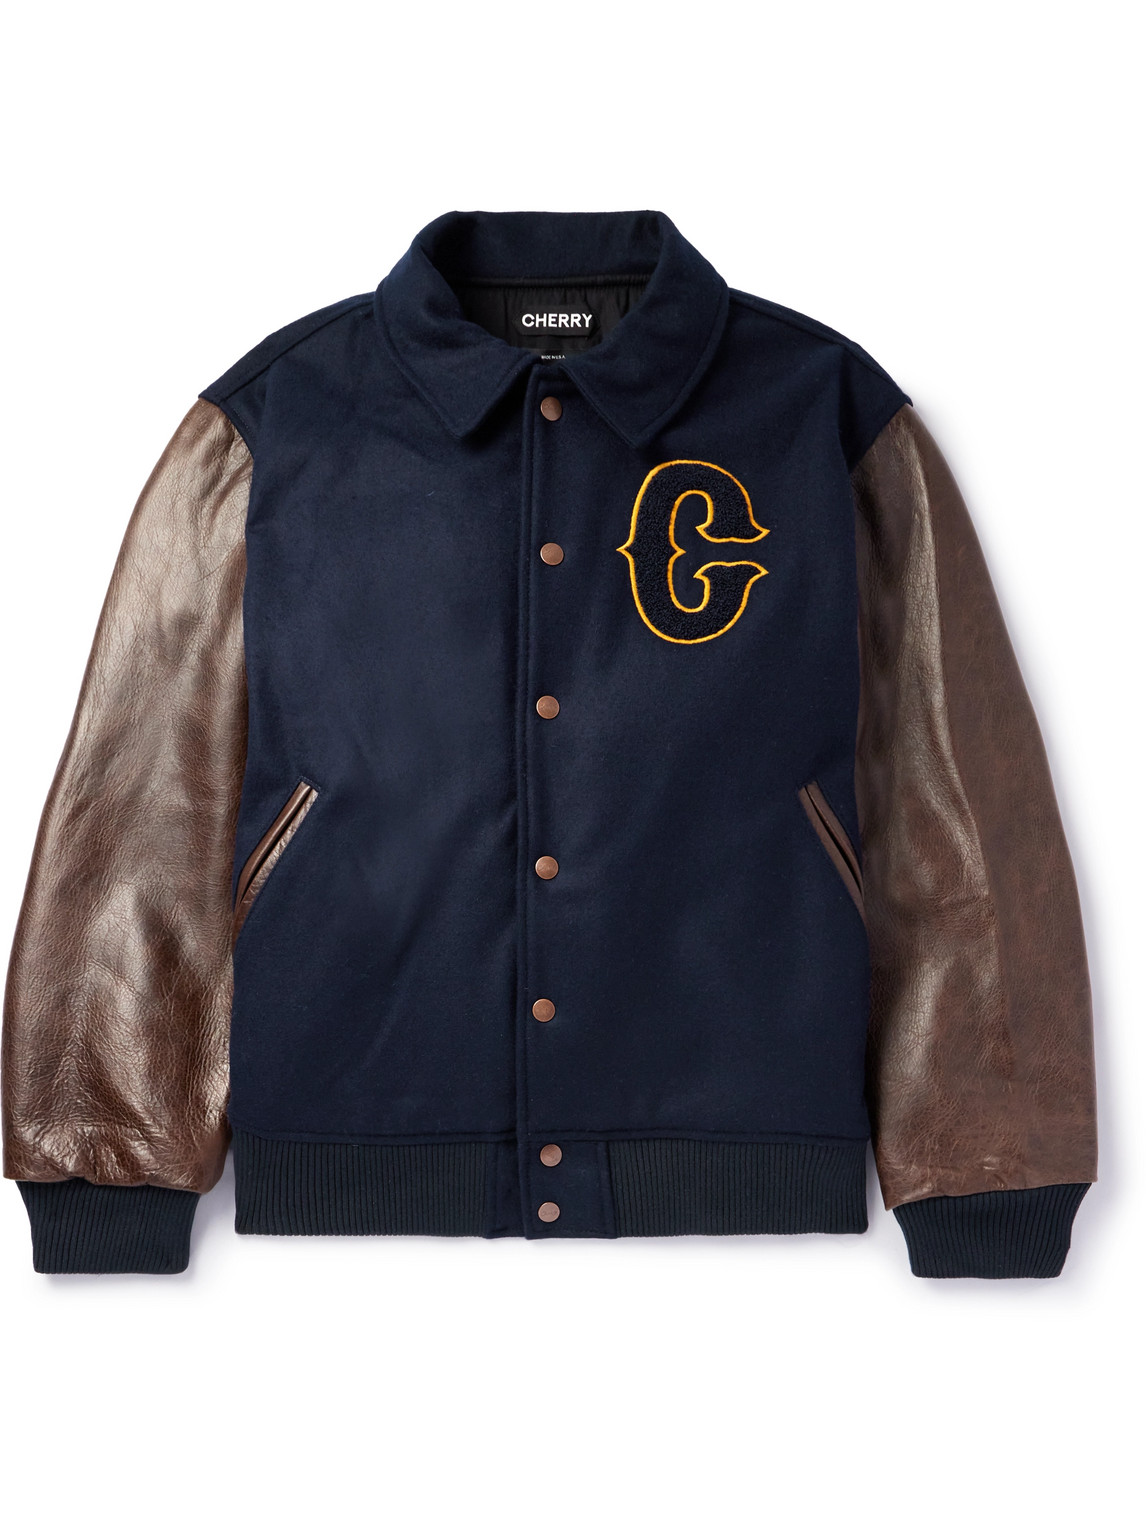 Ranch Wear Appliqued Wool and Leather Varsity Jacket